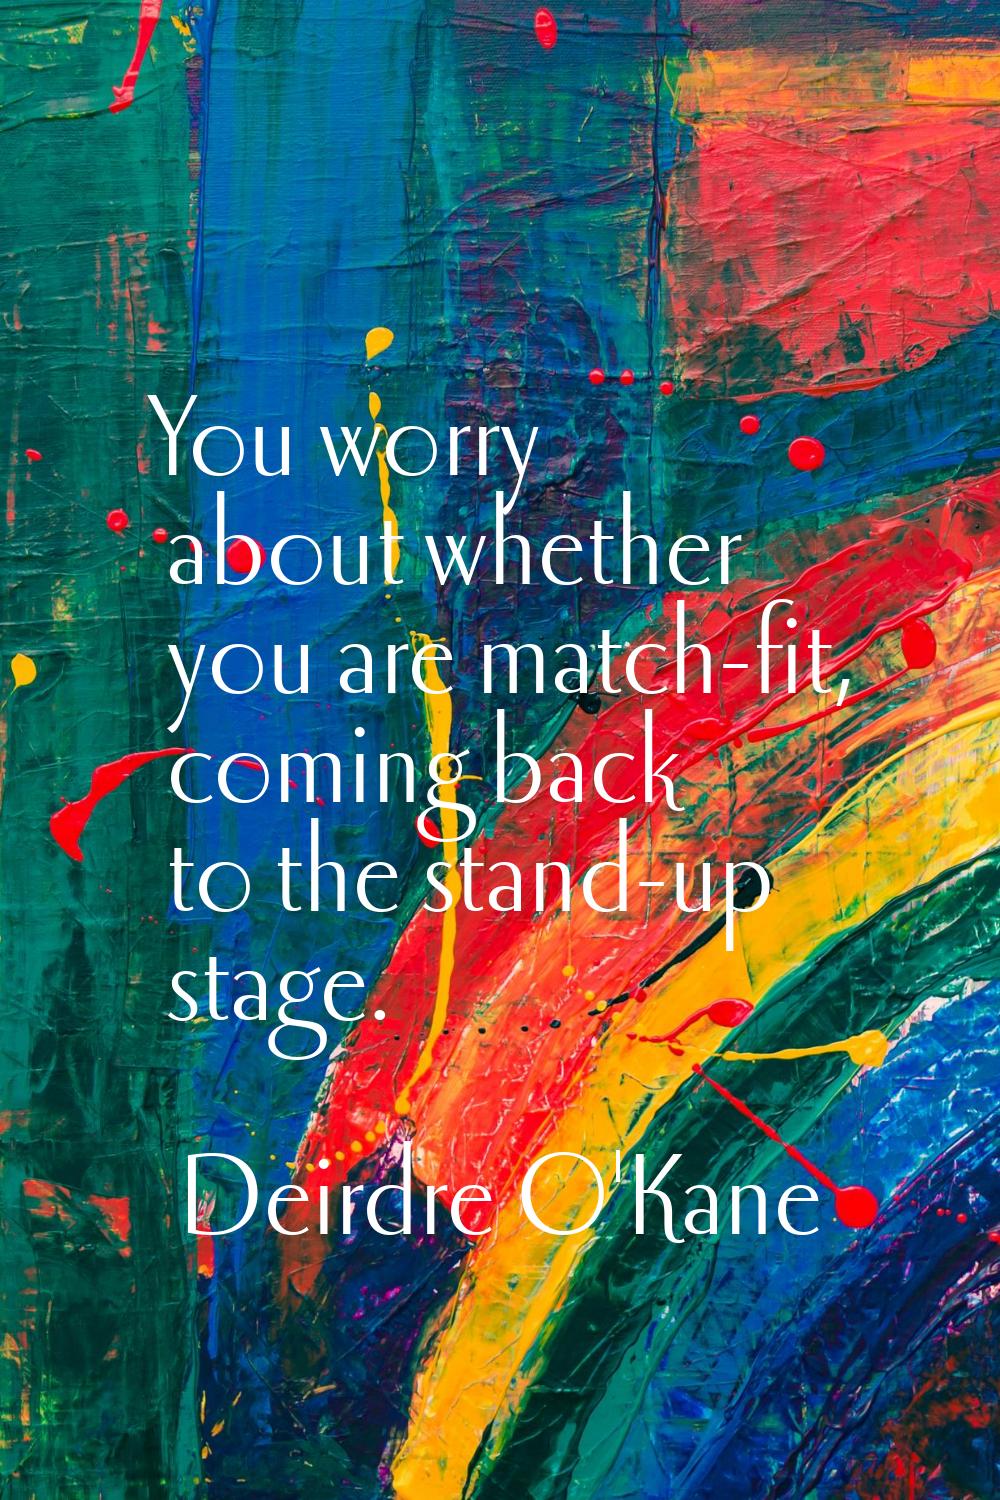 You worry about whether you are match-fit, coming back to the stand-up stage.